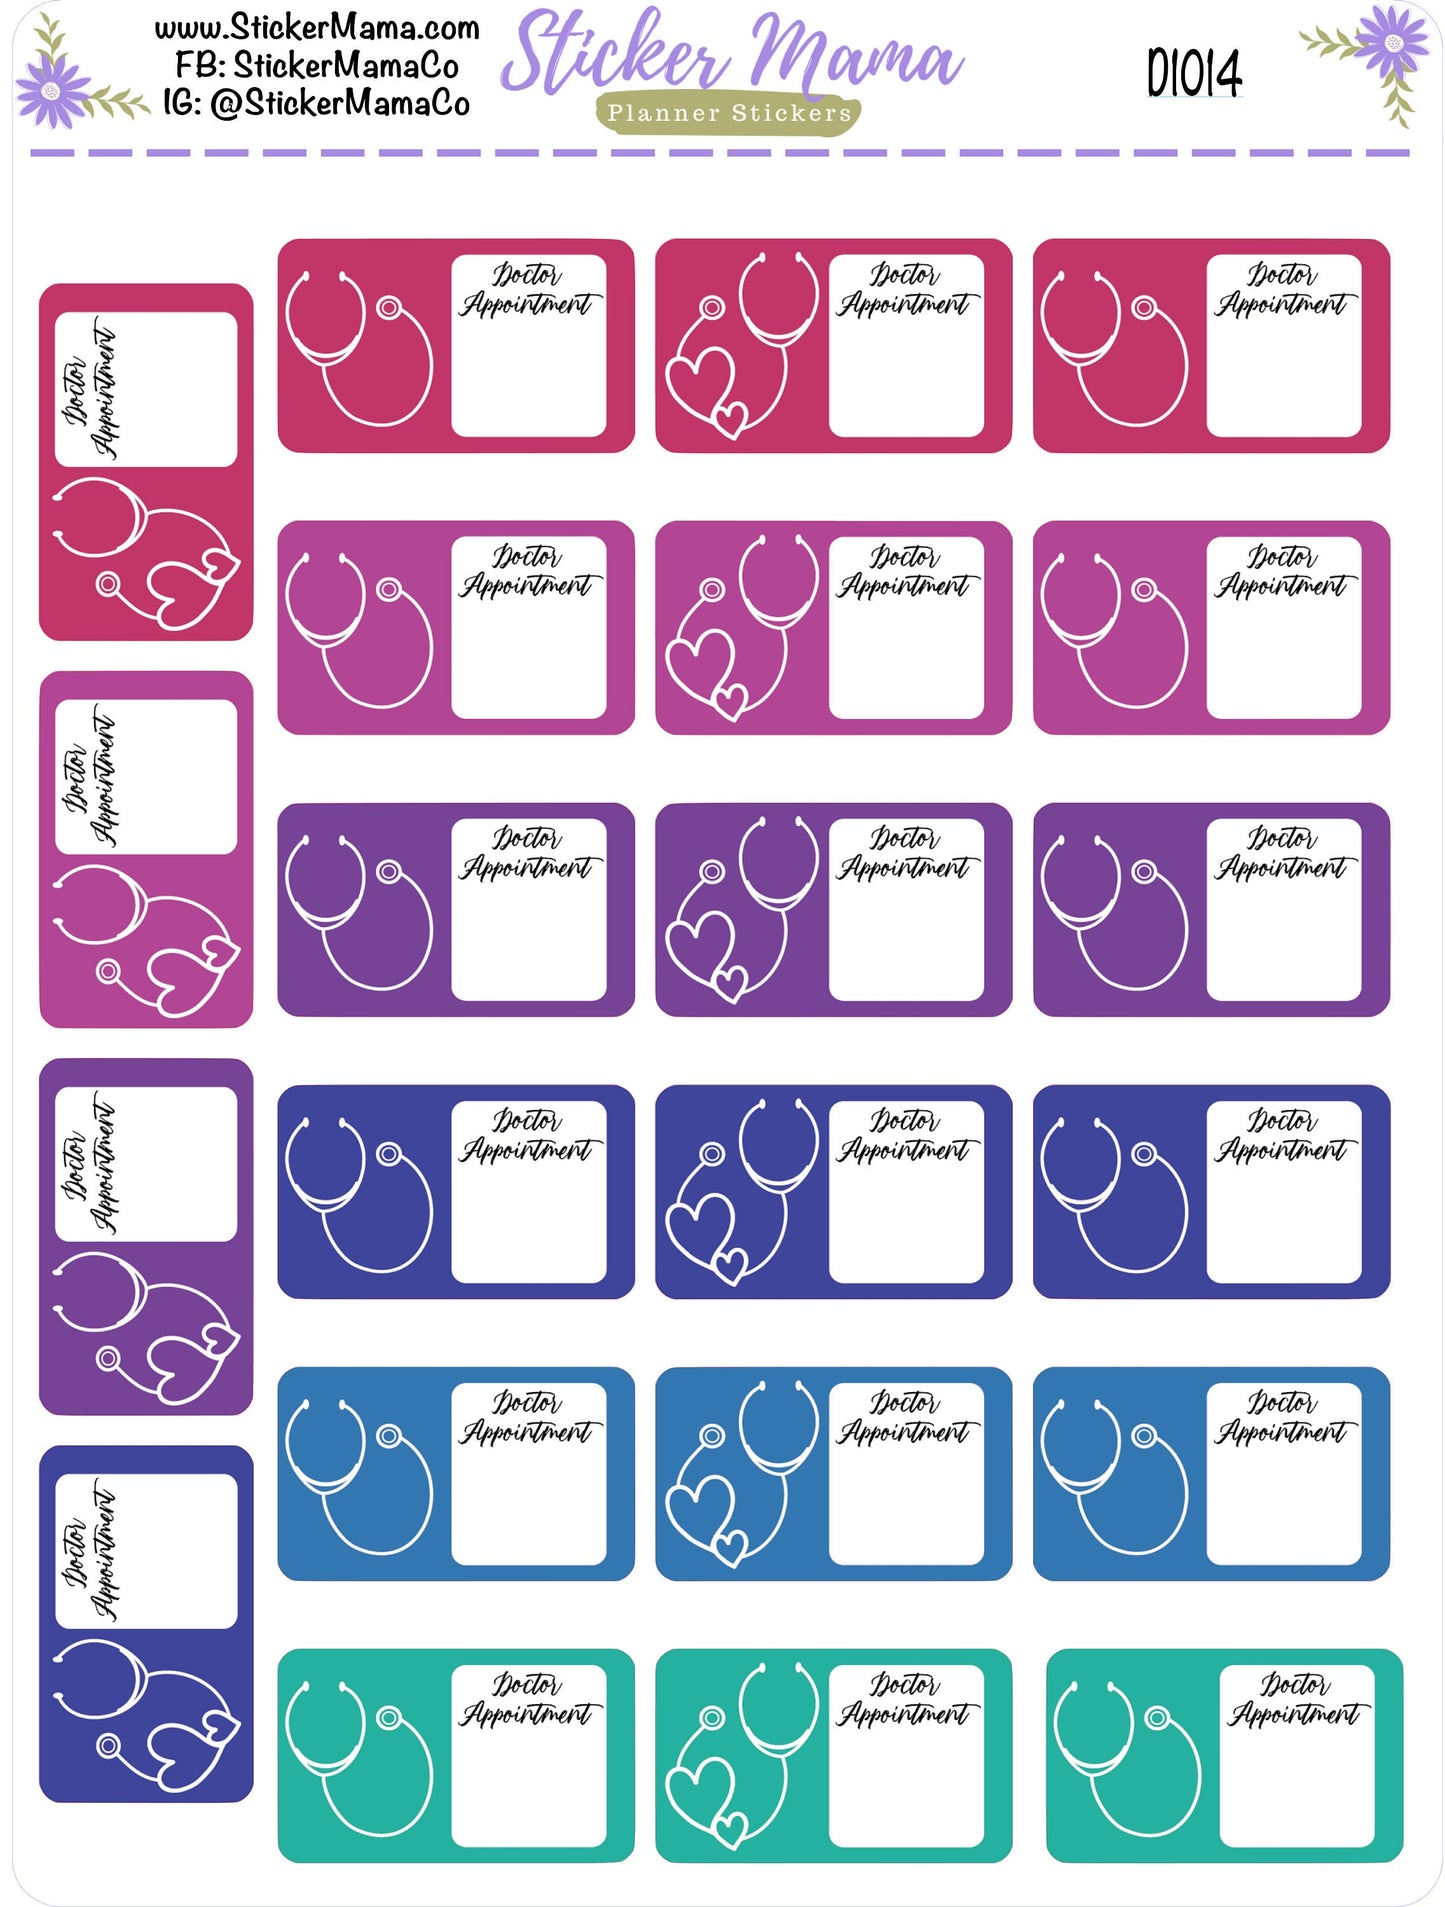 D1014 - DR APPOINTMENT STICKERS - Planner Stickers - Dr Appointment Stickers for Planners